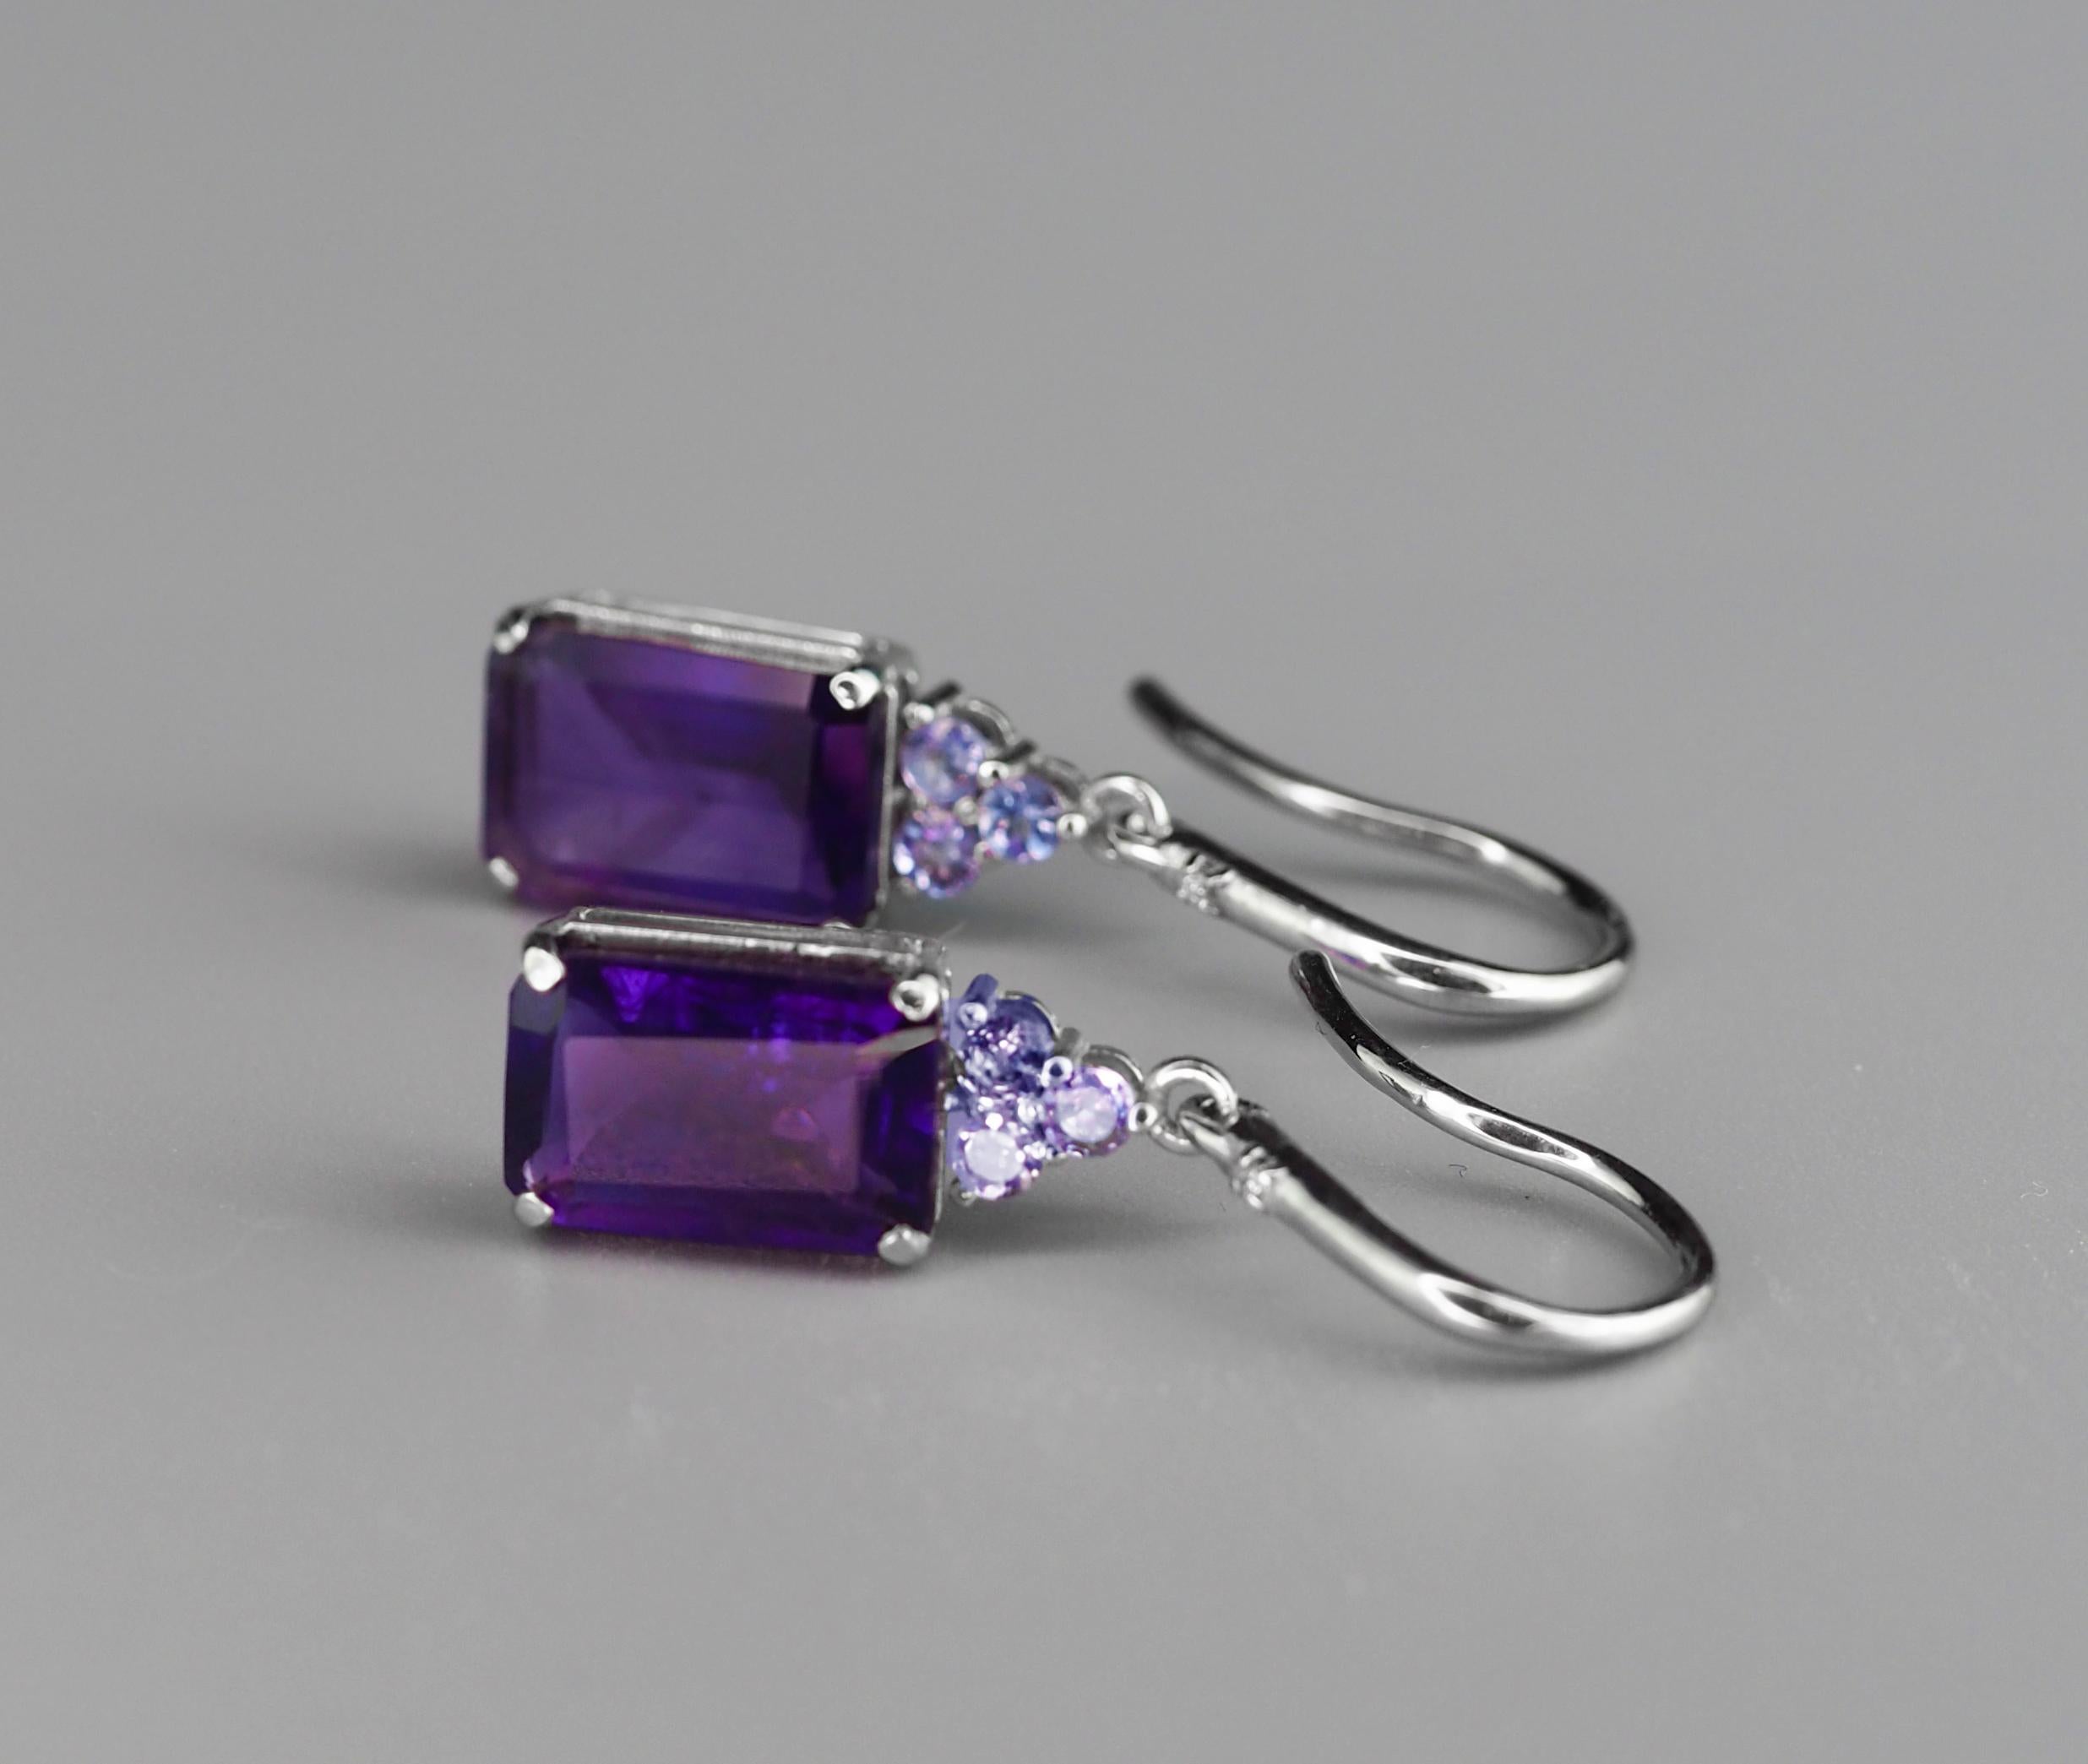 14 Kt White Gold Earrings with Amethysts, Tanzanites and Diamonds! For Sale 1